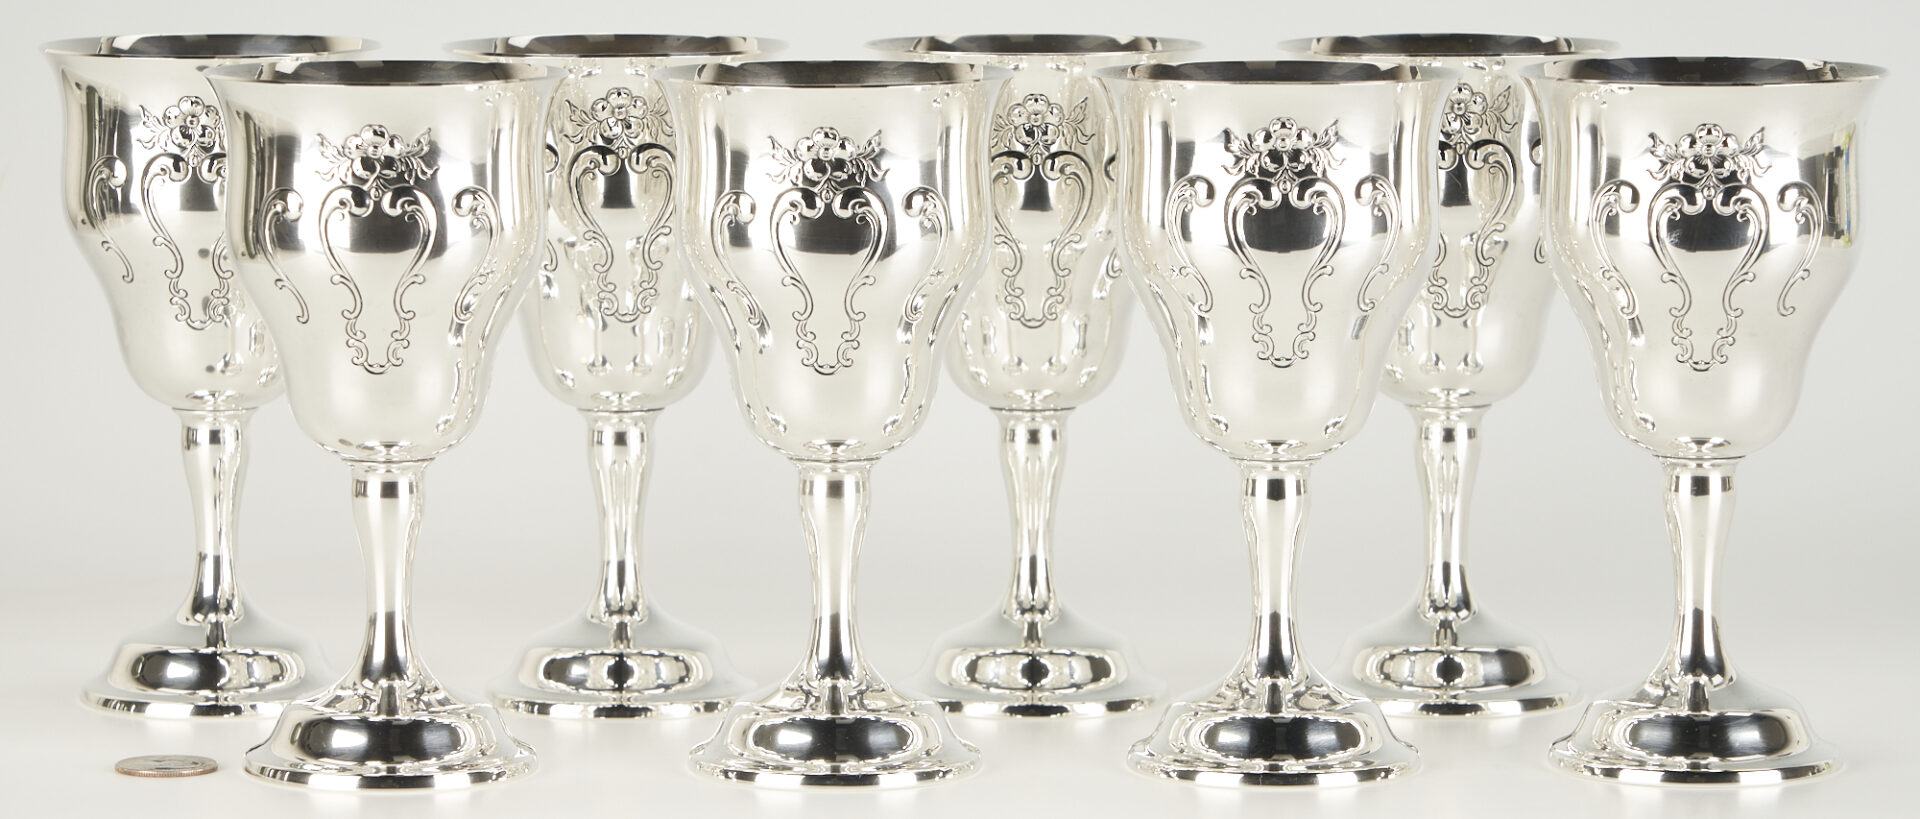 Lot 333: 8 Gorham Chantilly Countess Sterling Silver Goblets